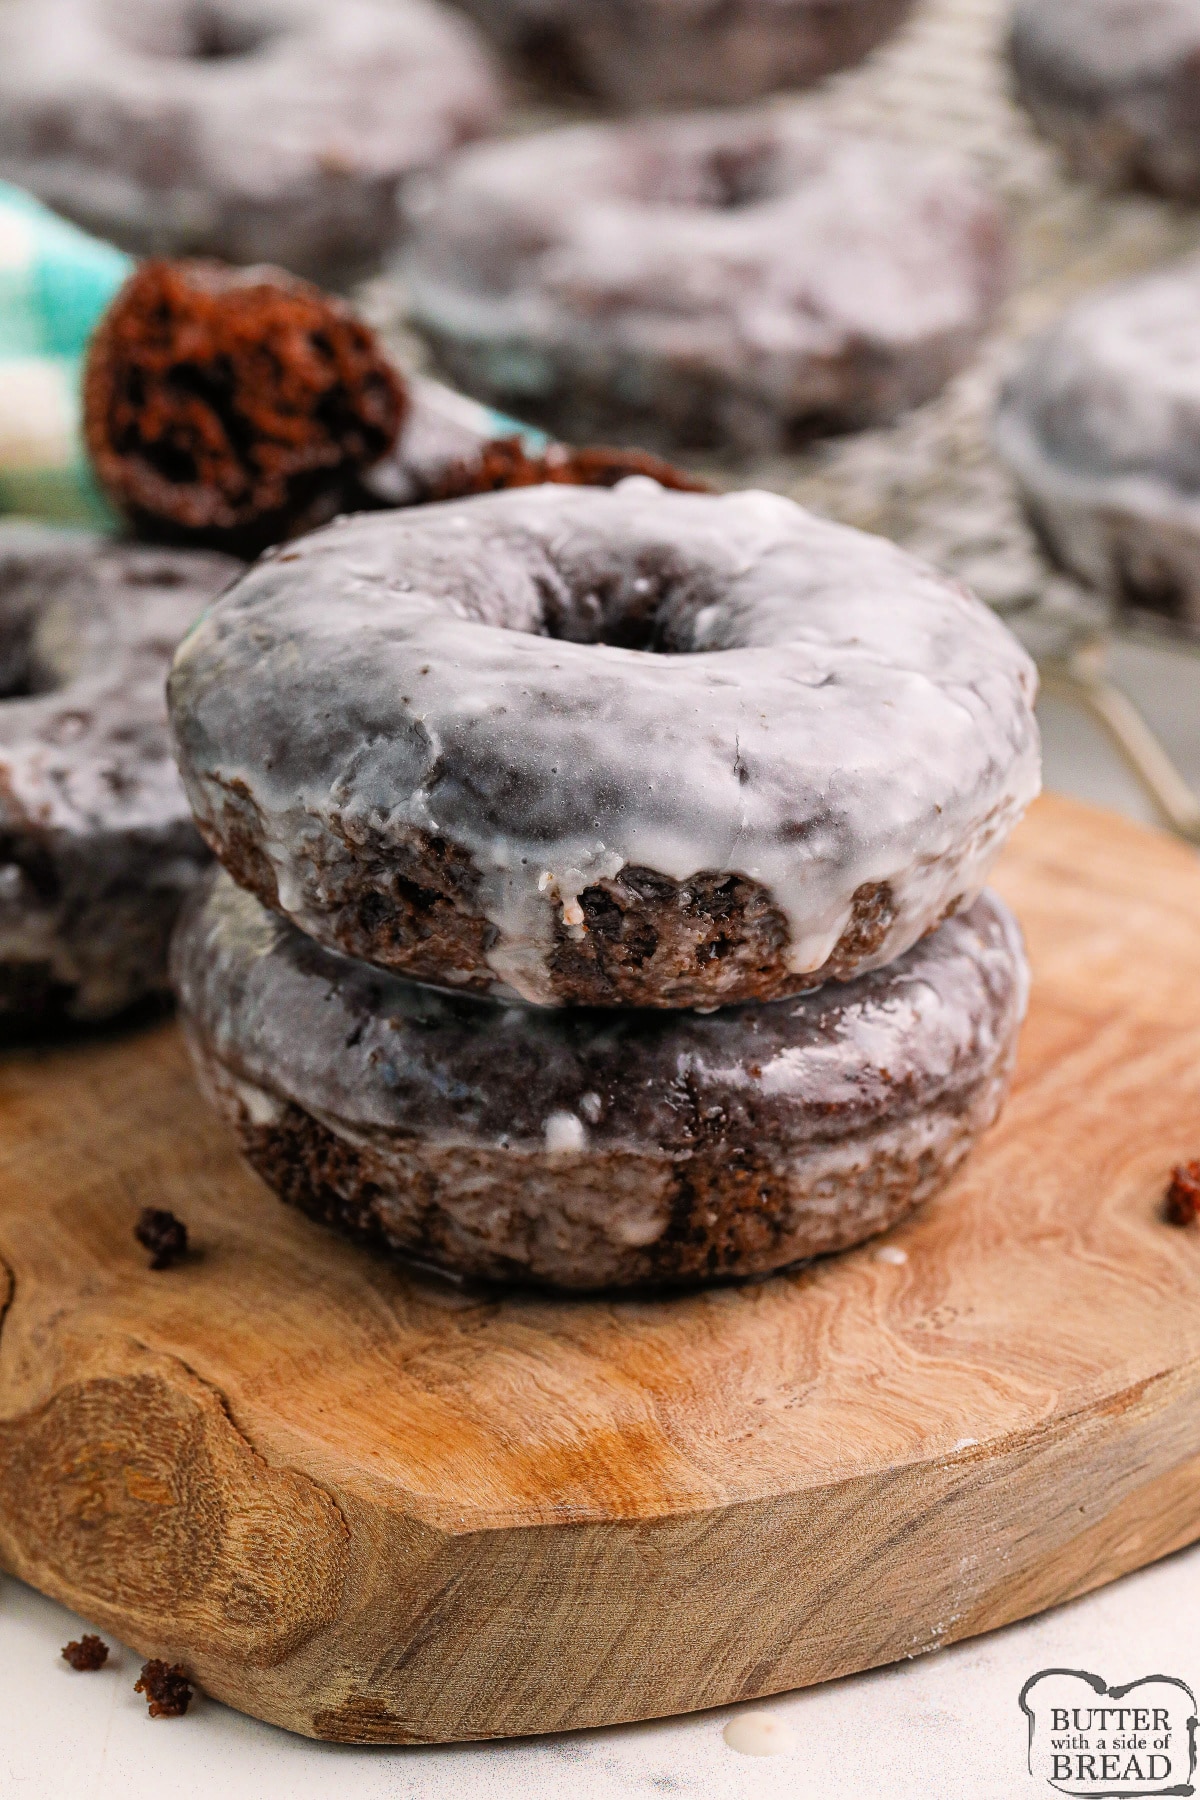 Baked chocolate donuts.